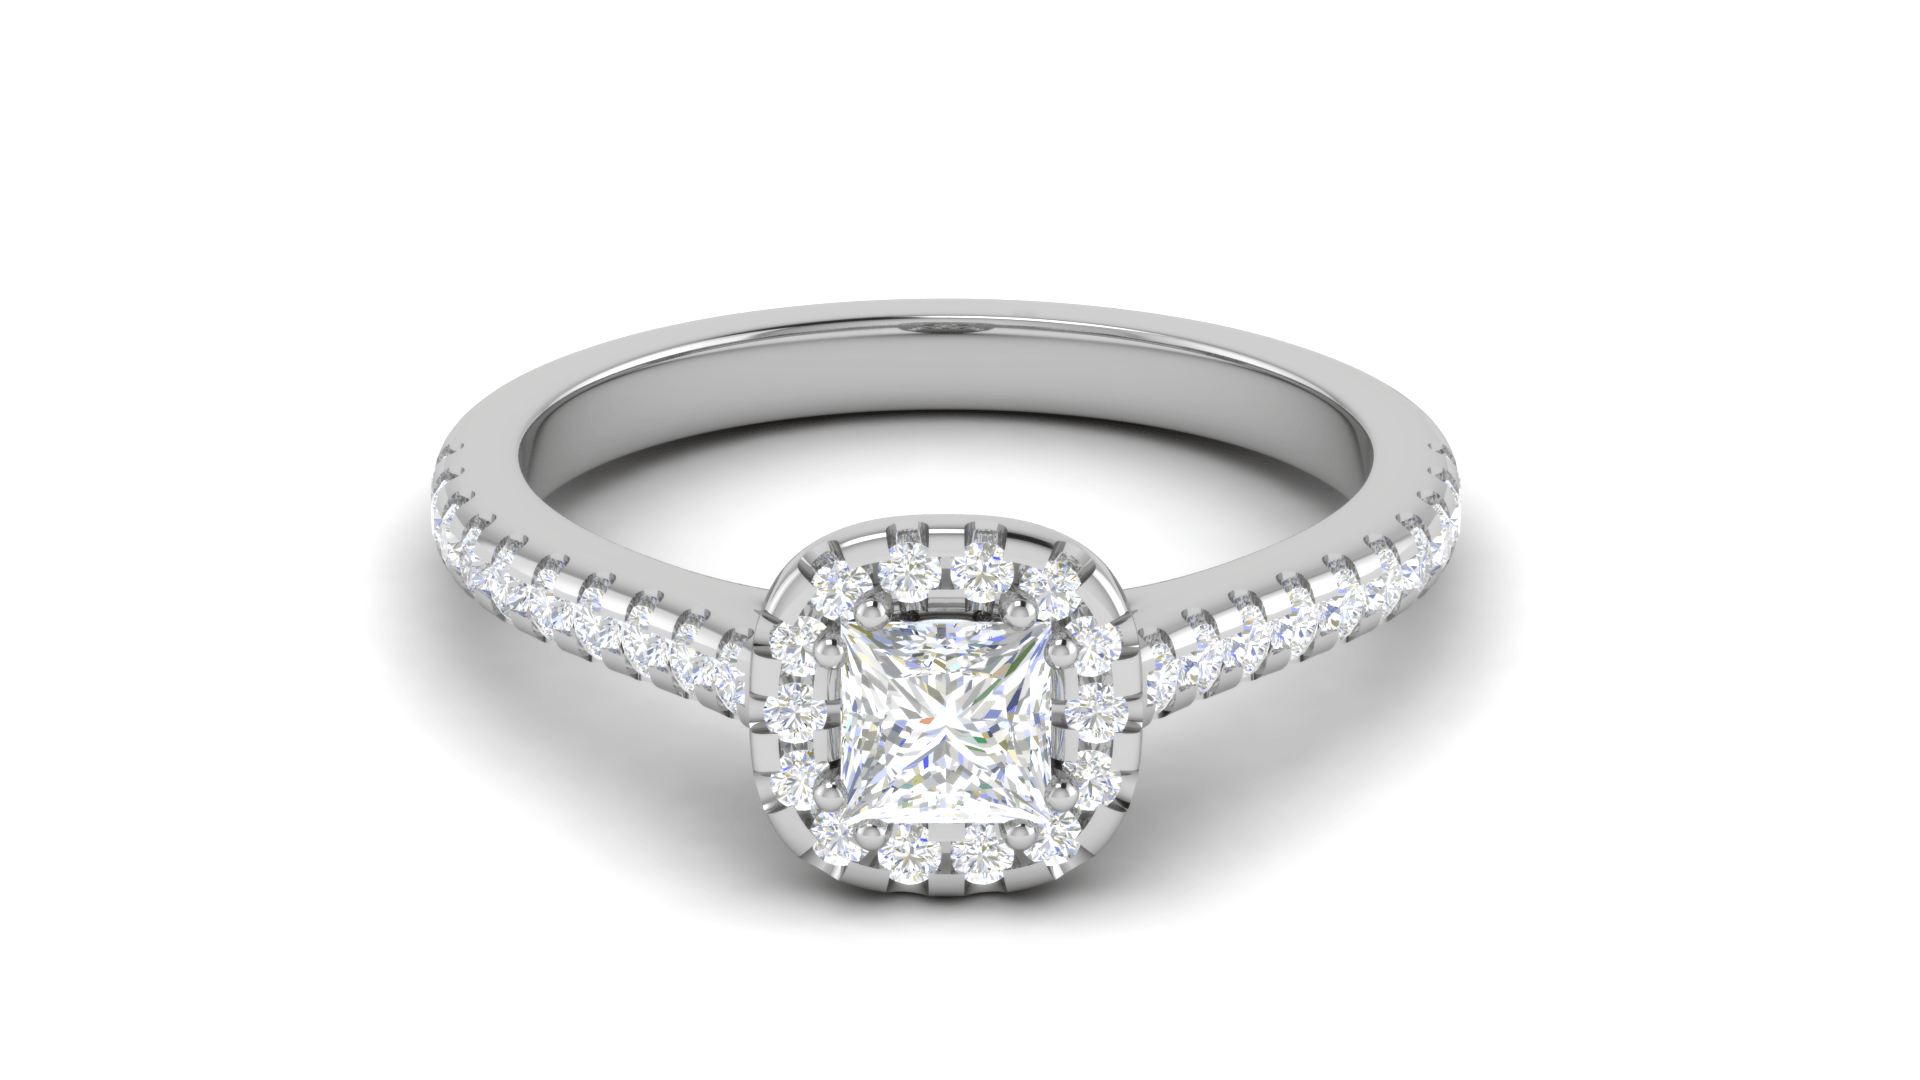 Women's Wedding Rings for Every Style and Budget